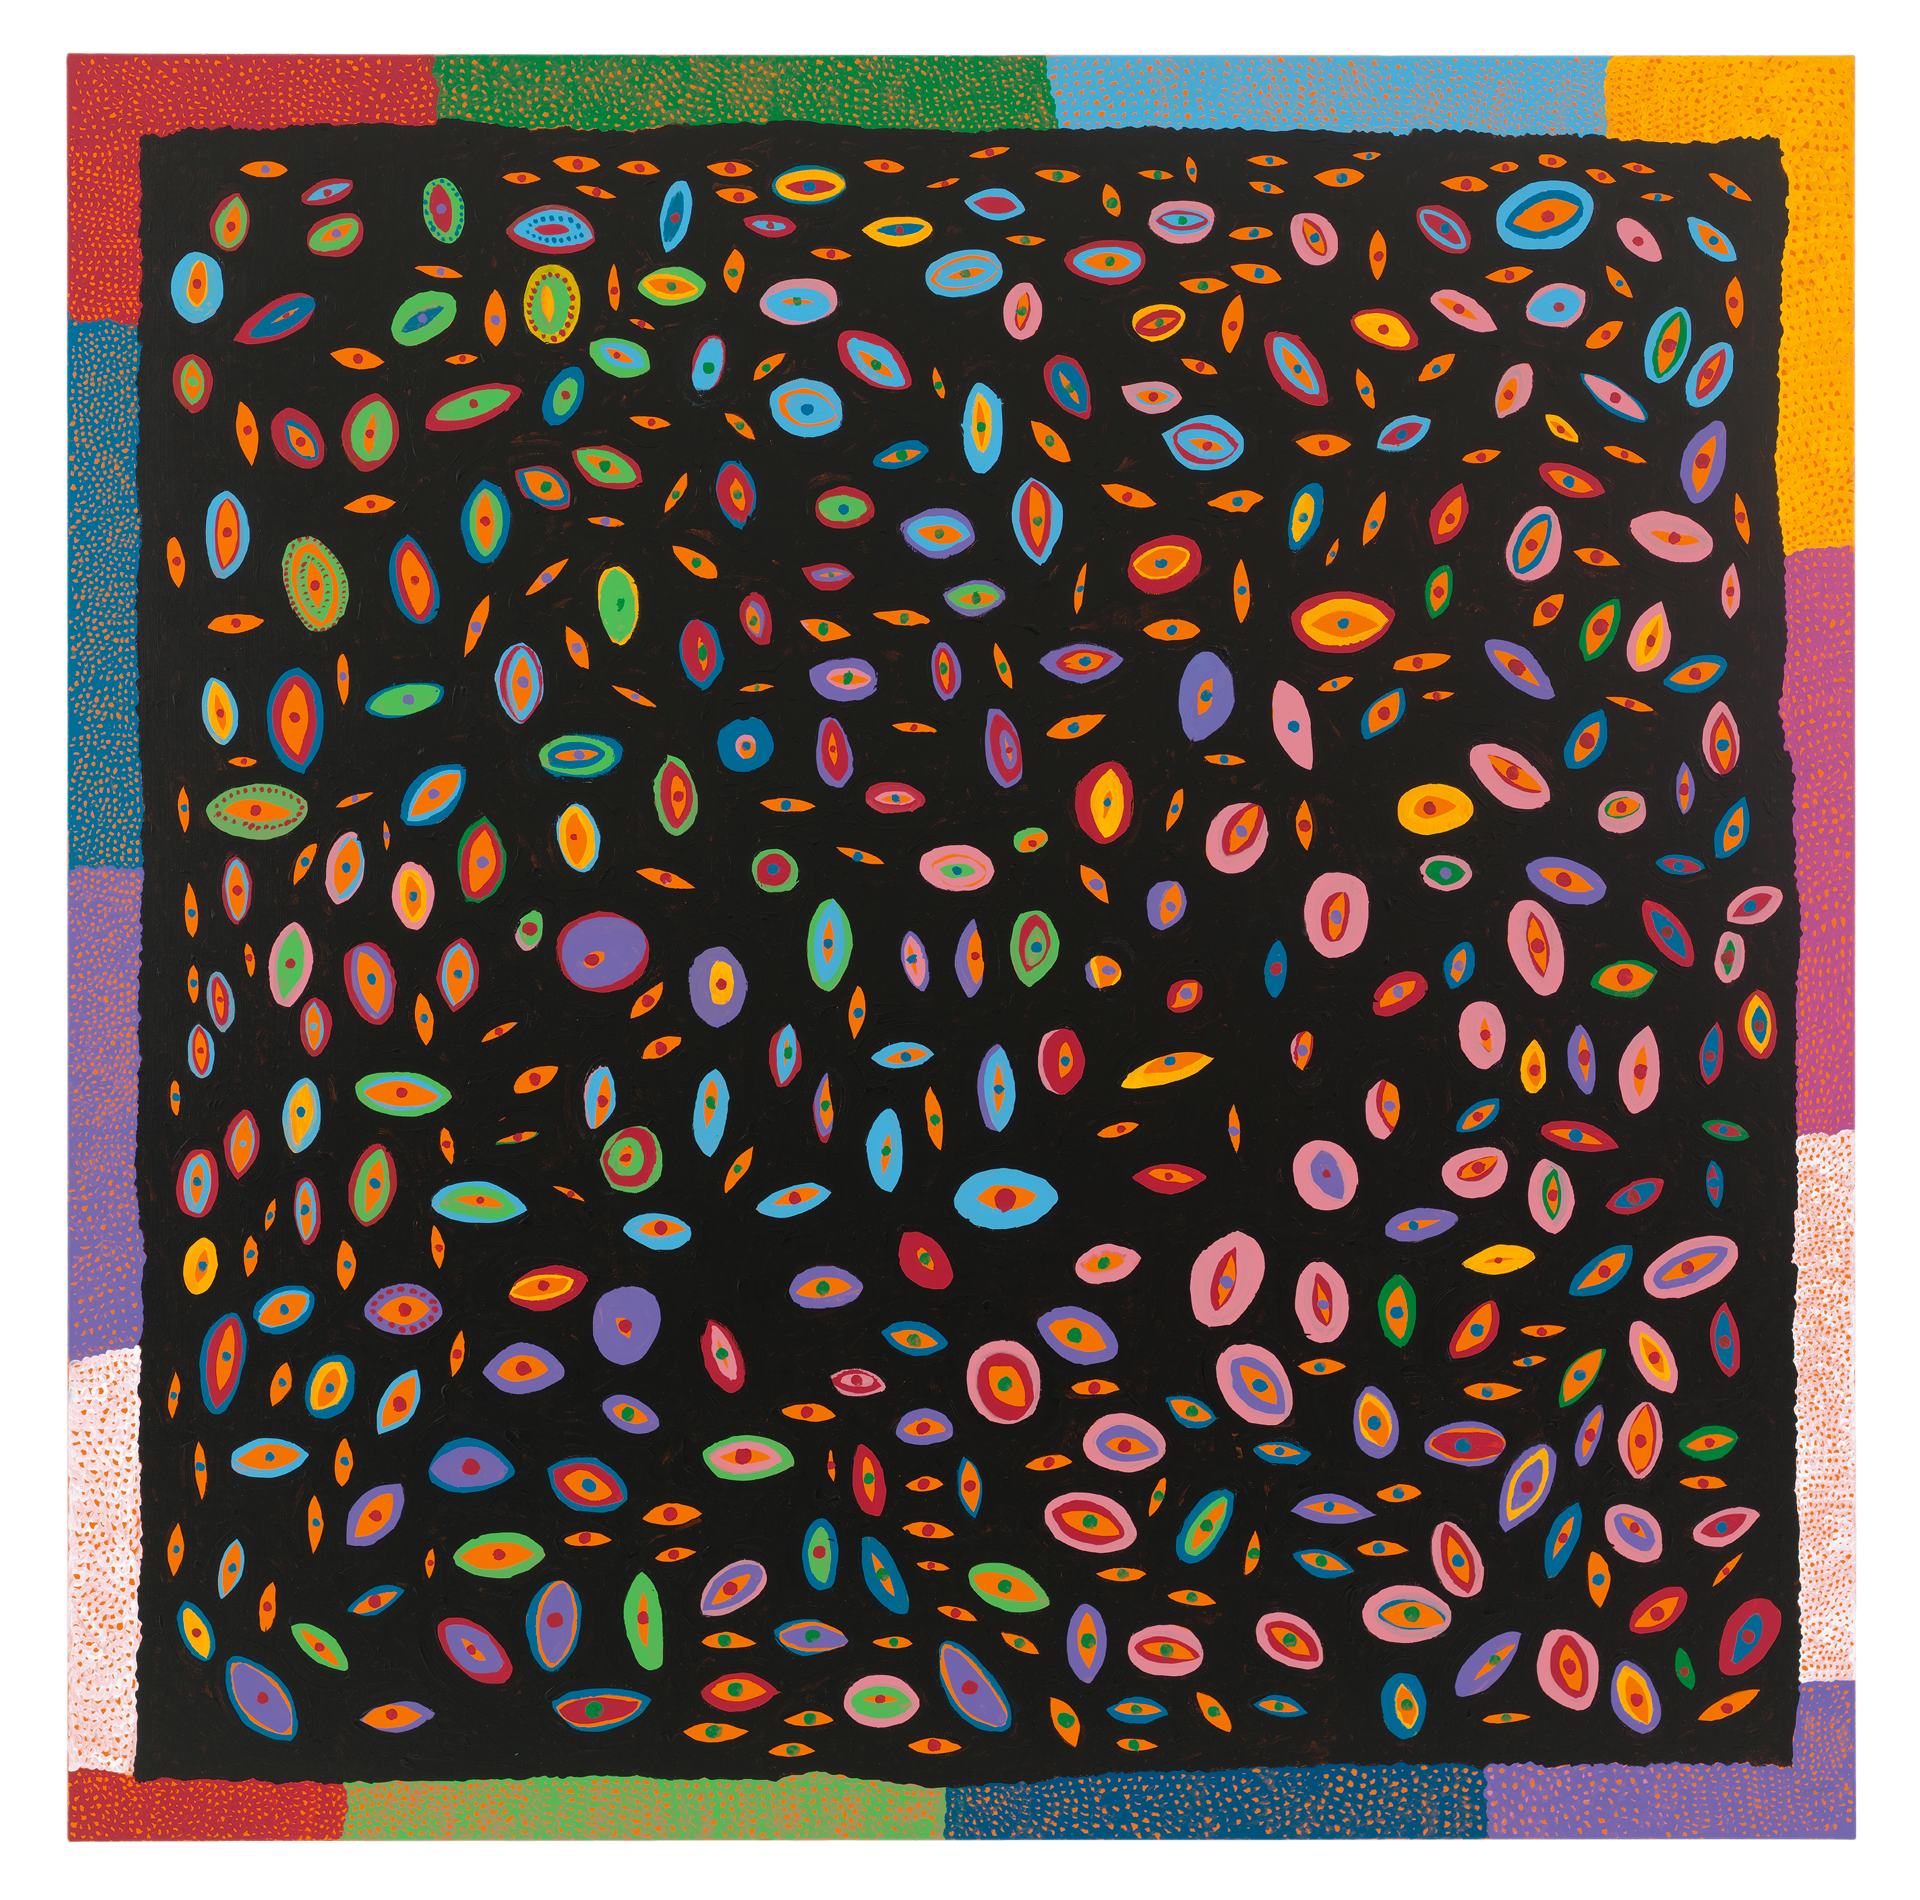 A painting by Yayoi Kusama, titled FEAR OF YOUTH OVERWHELMED BY THE SPRINGTIME OF LIFE, dated 2014.